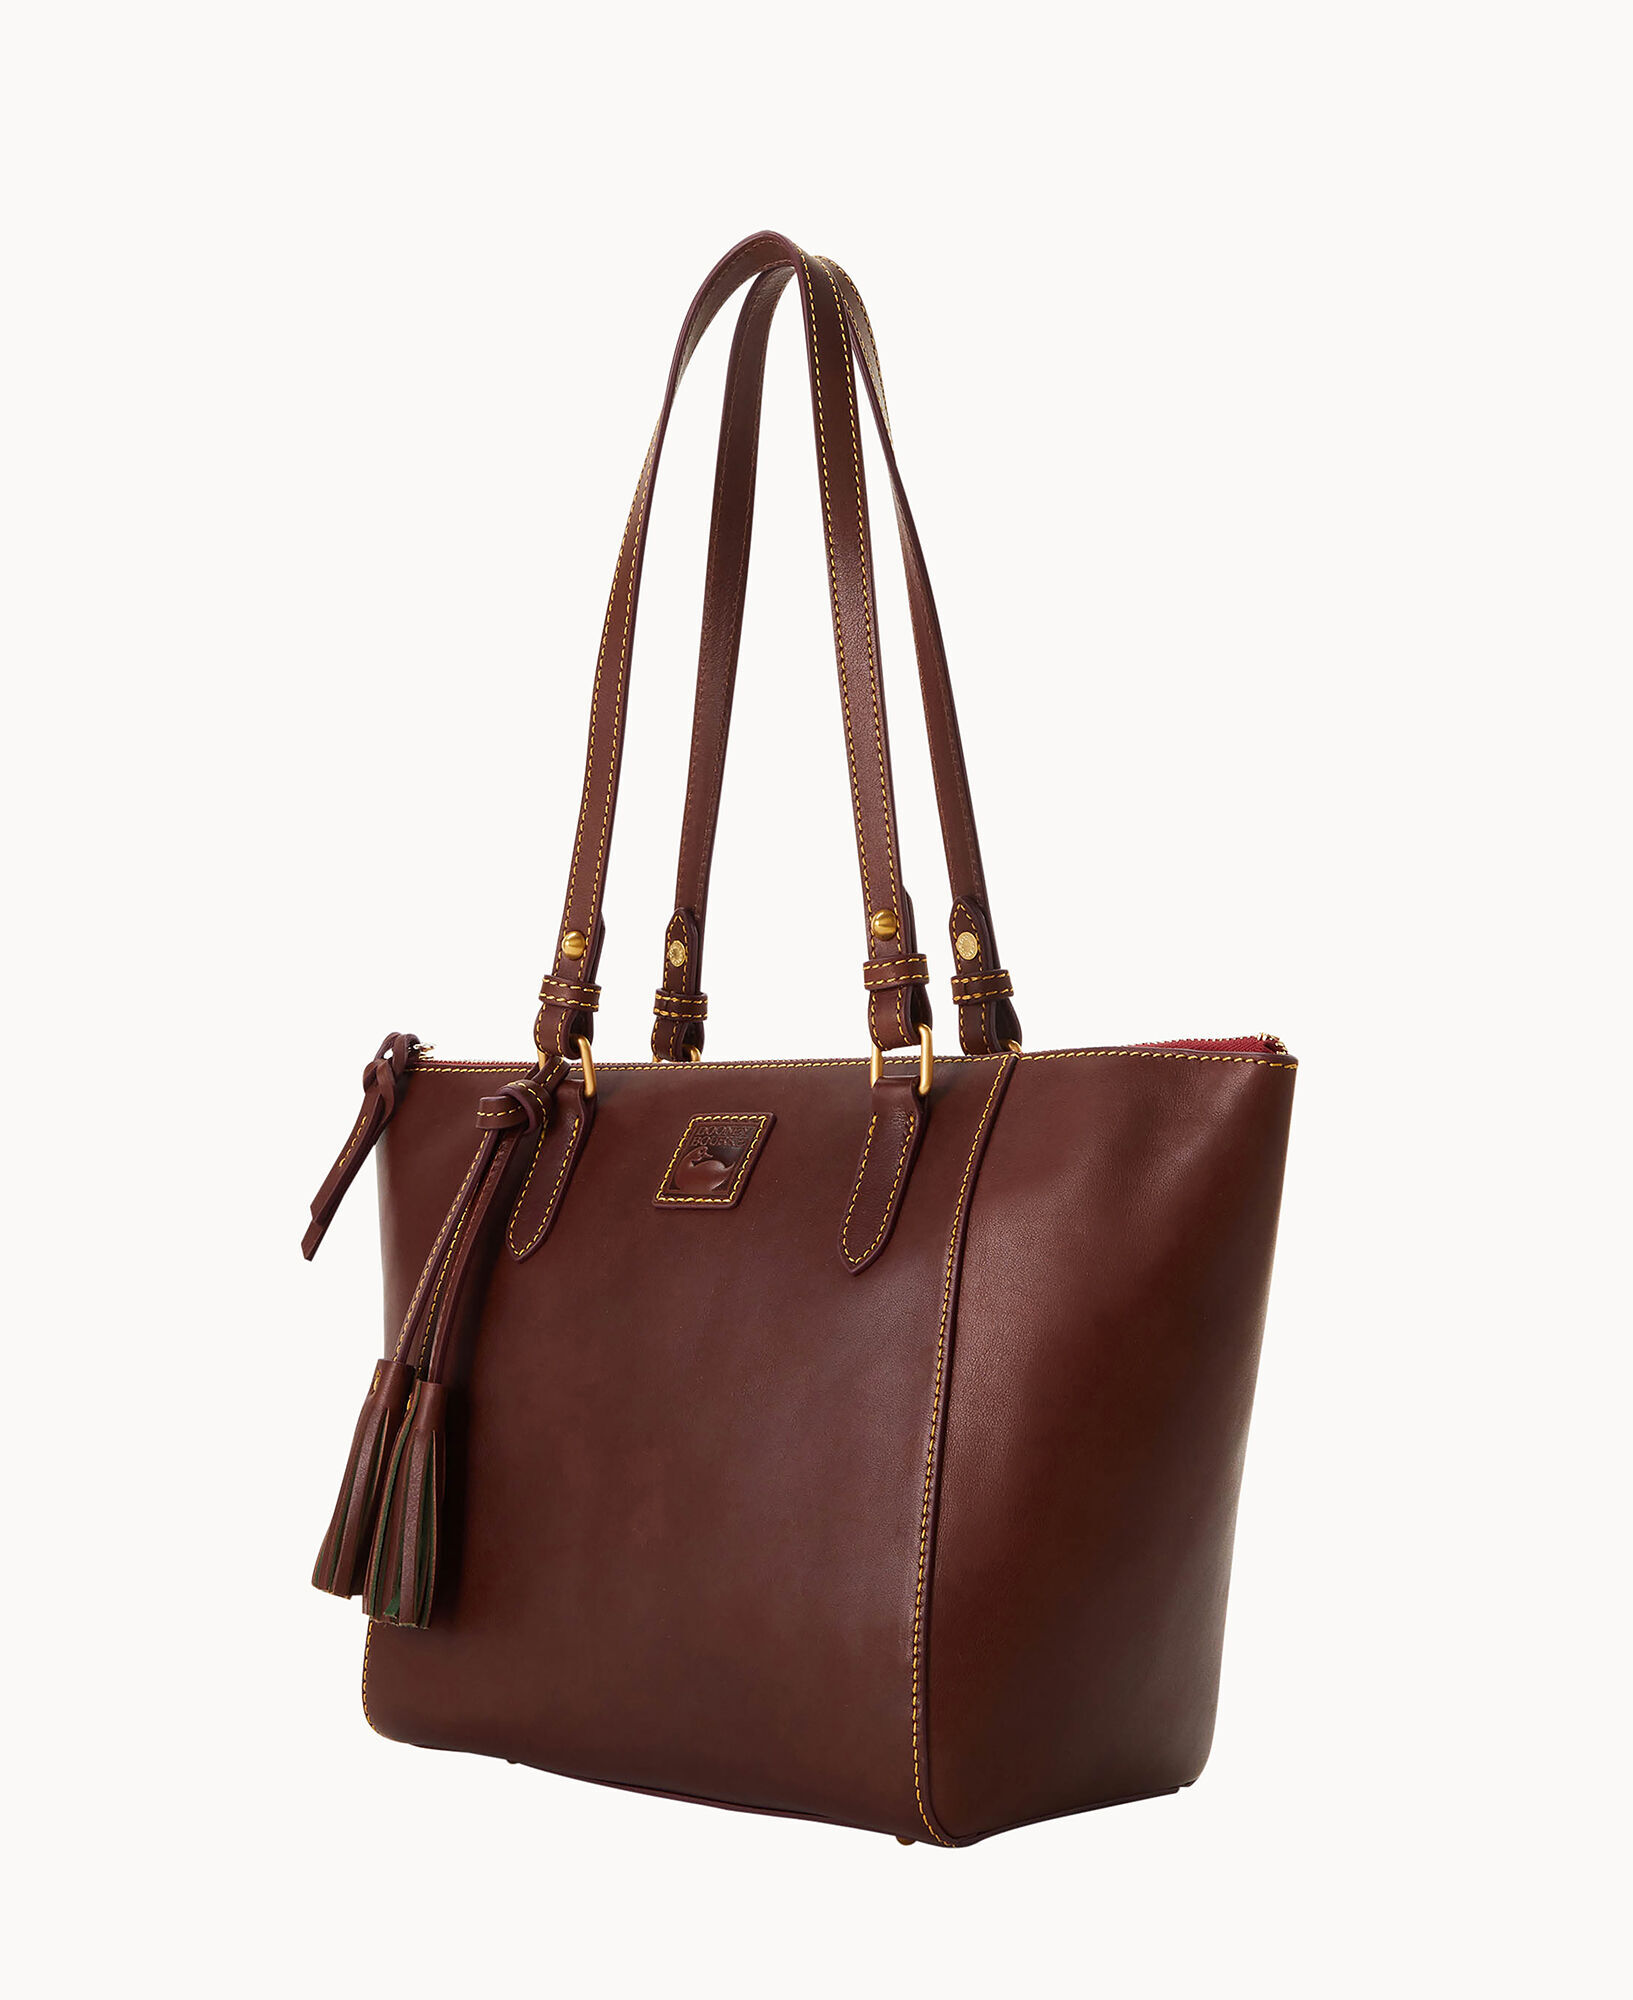 Dooney & Bourke Wexford Leather Maxine Tote